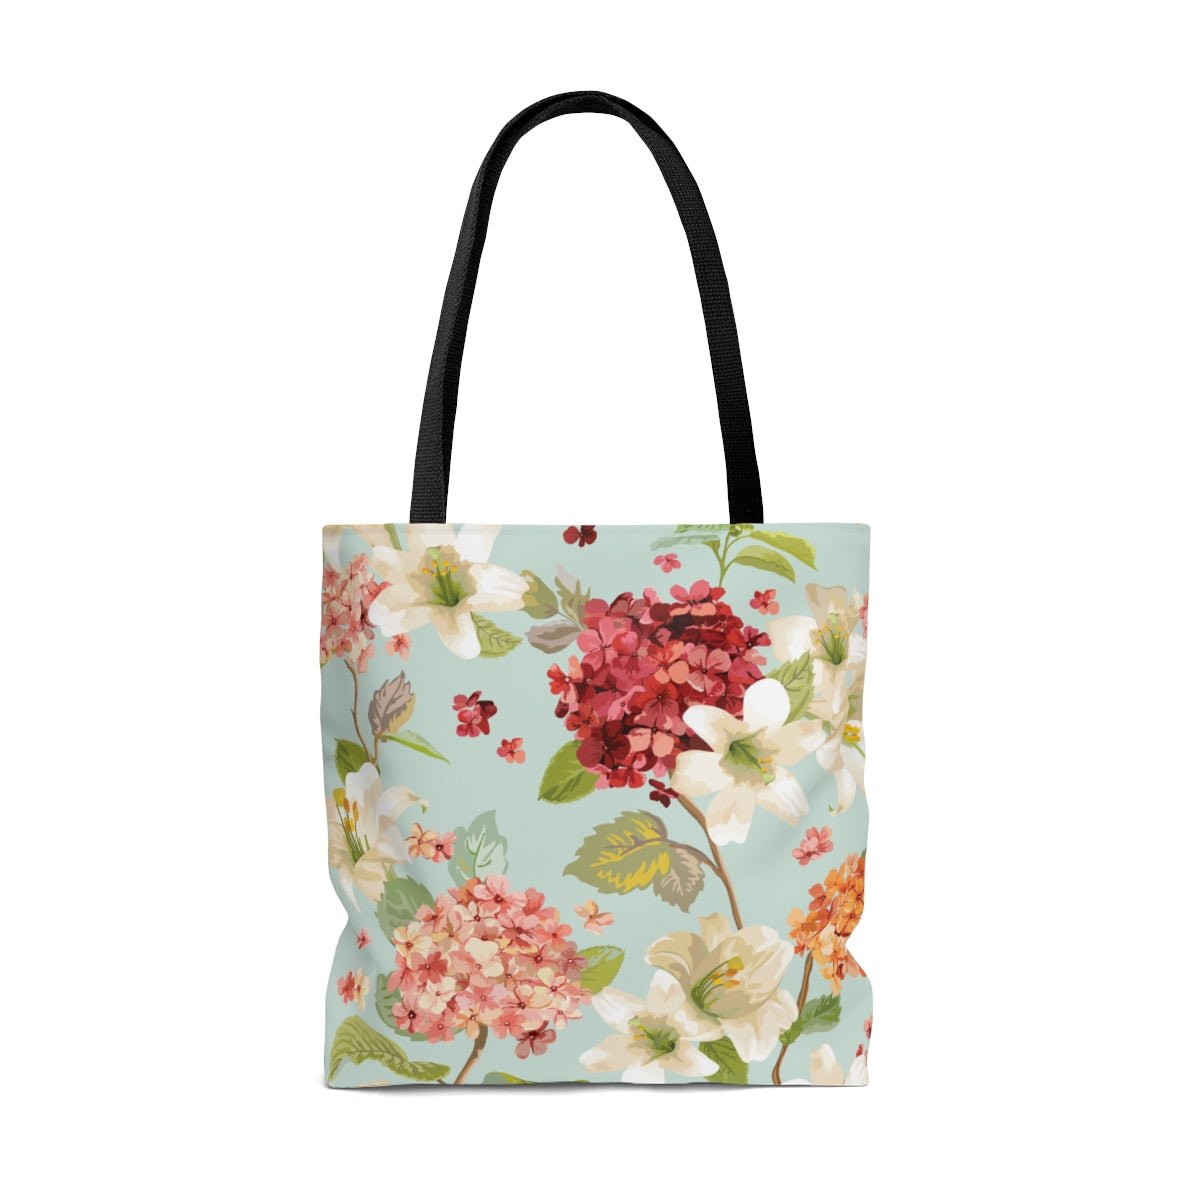 Autumn Hortensia and Lily Flowers Tote Bag - Puffin Lime